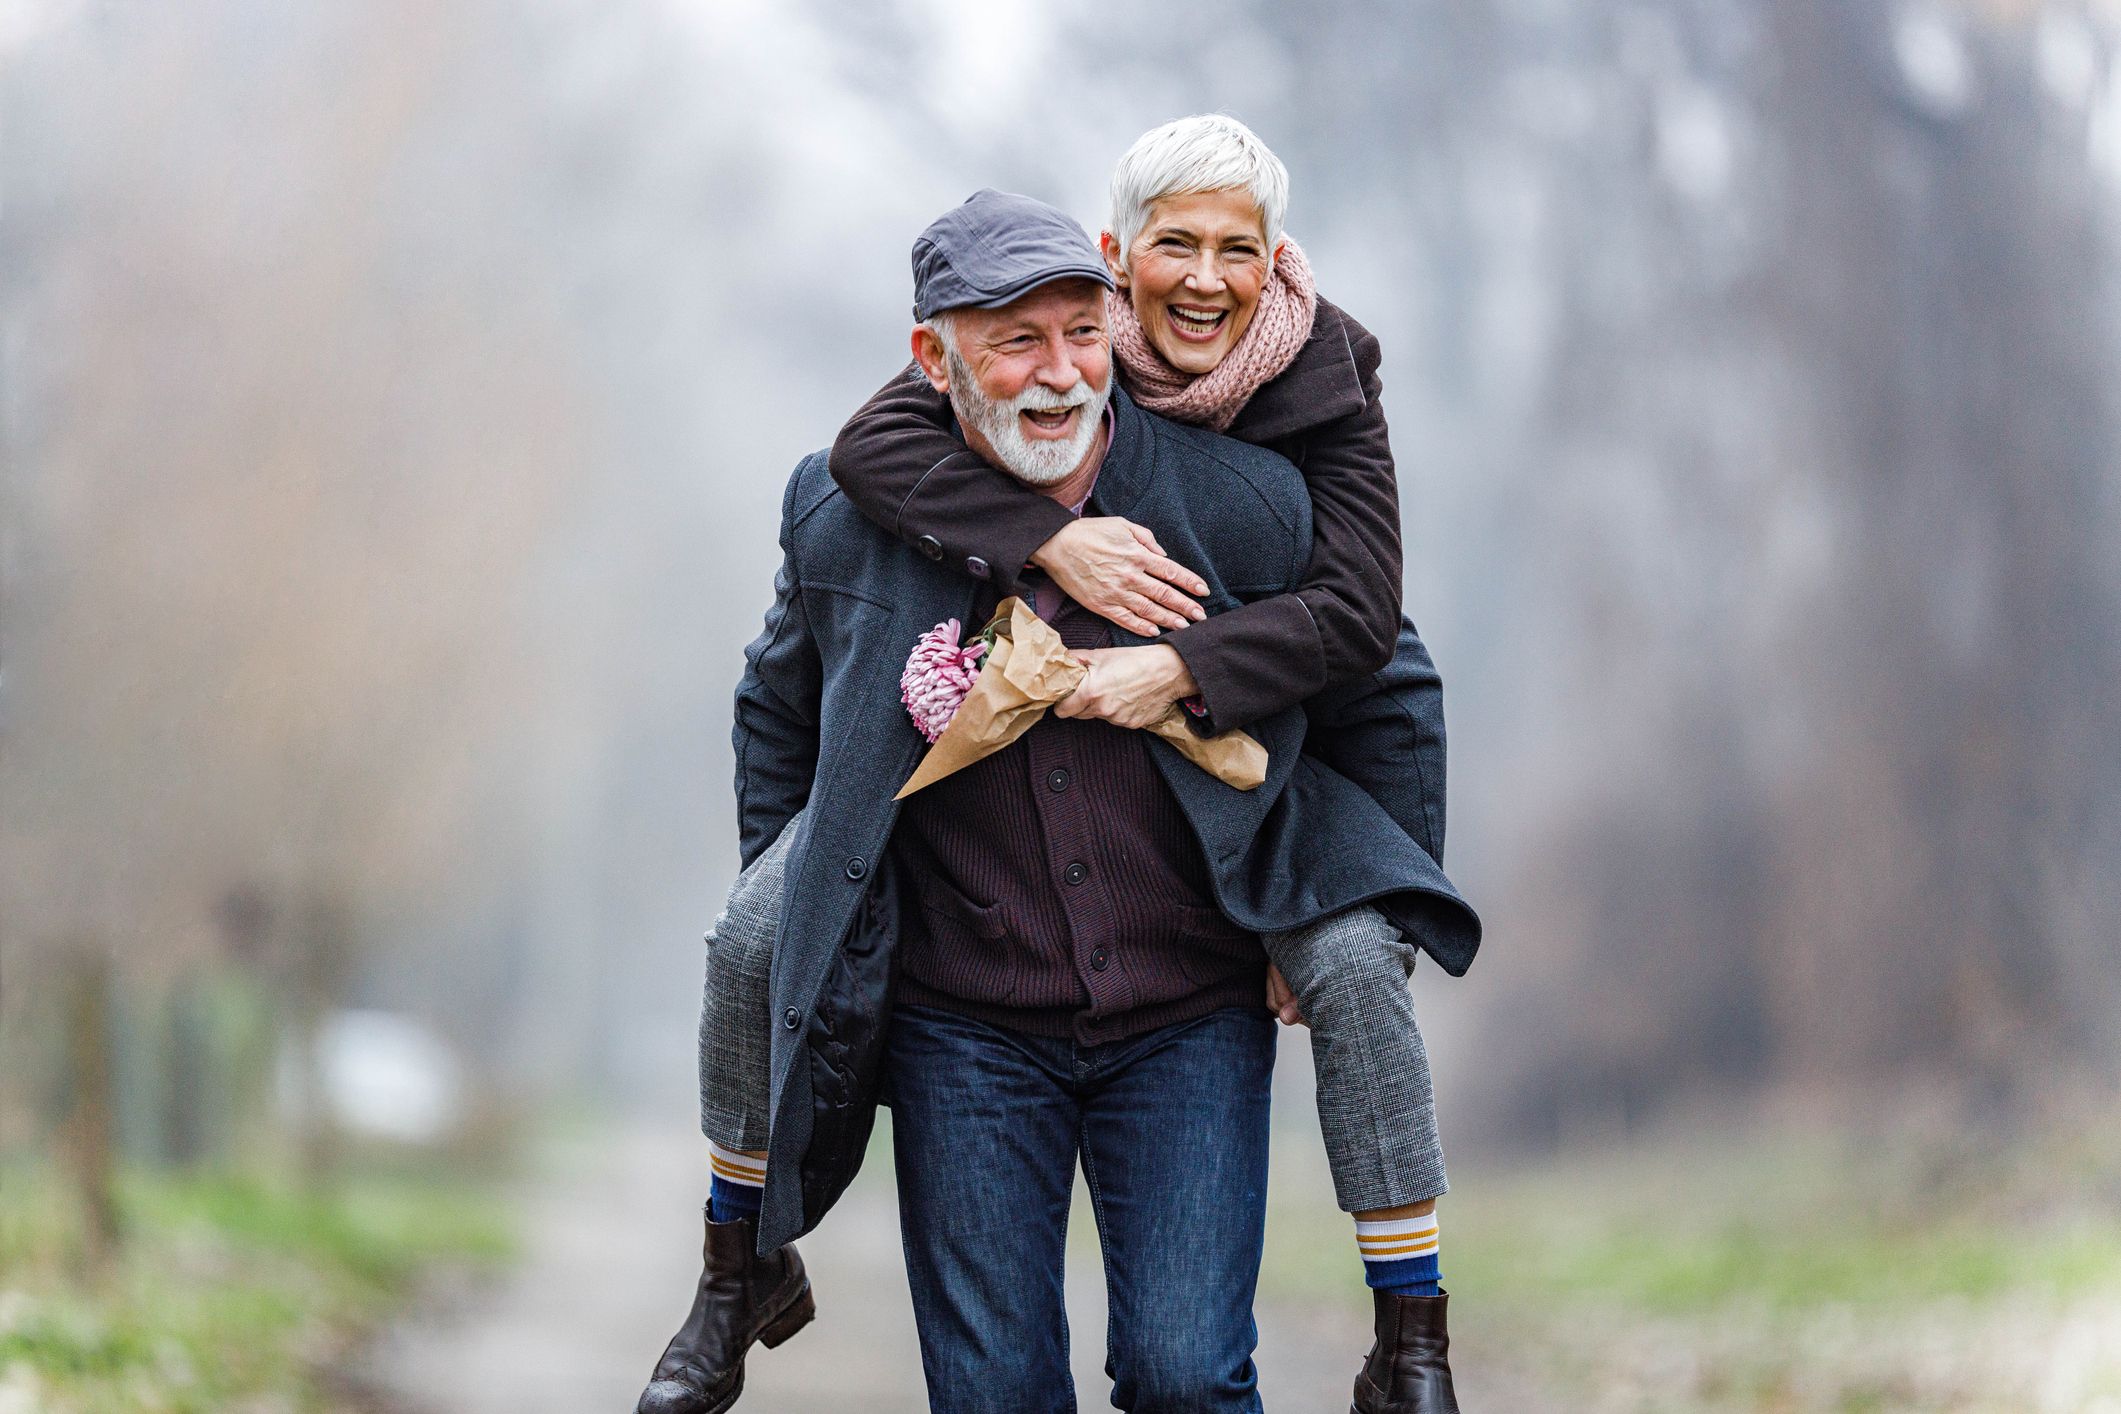 10 Best Dating Sites for People Over 50 to Find Love pic